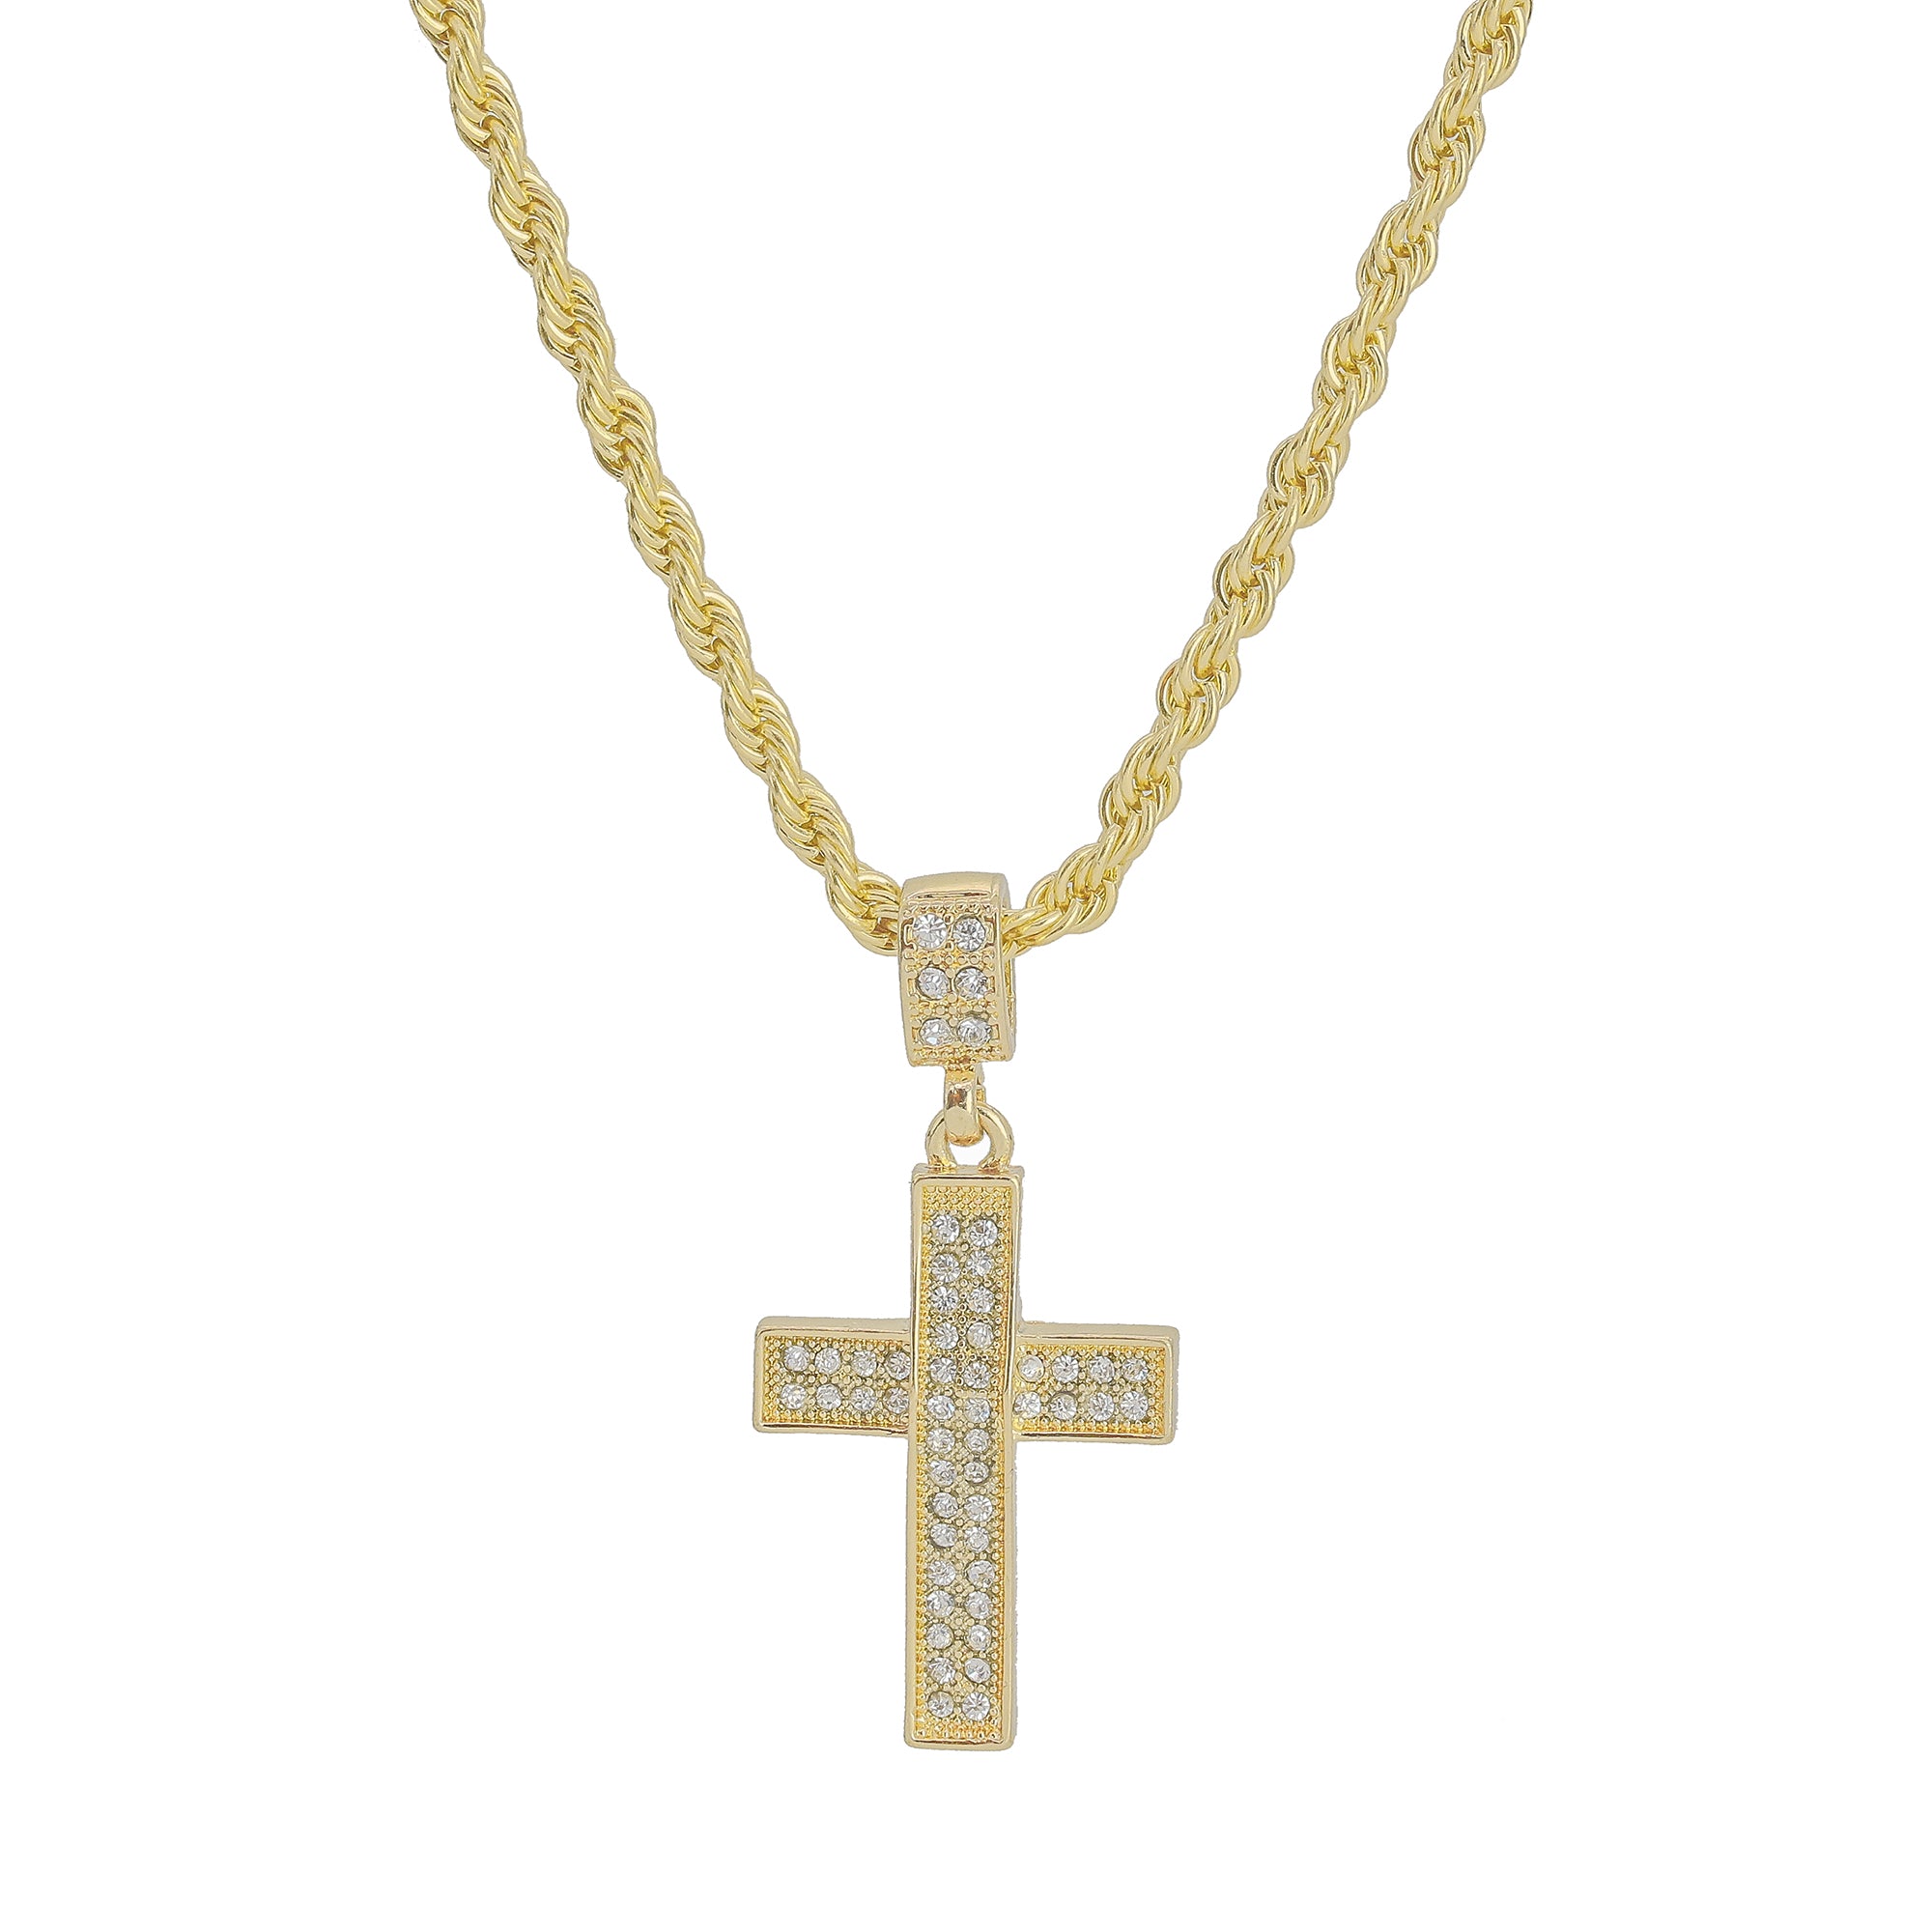 3d 2 Row Cross Pendant 4mm 24" Rope Chain 18k Gold Plated